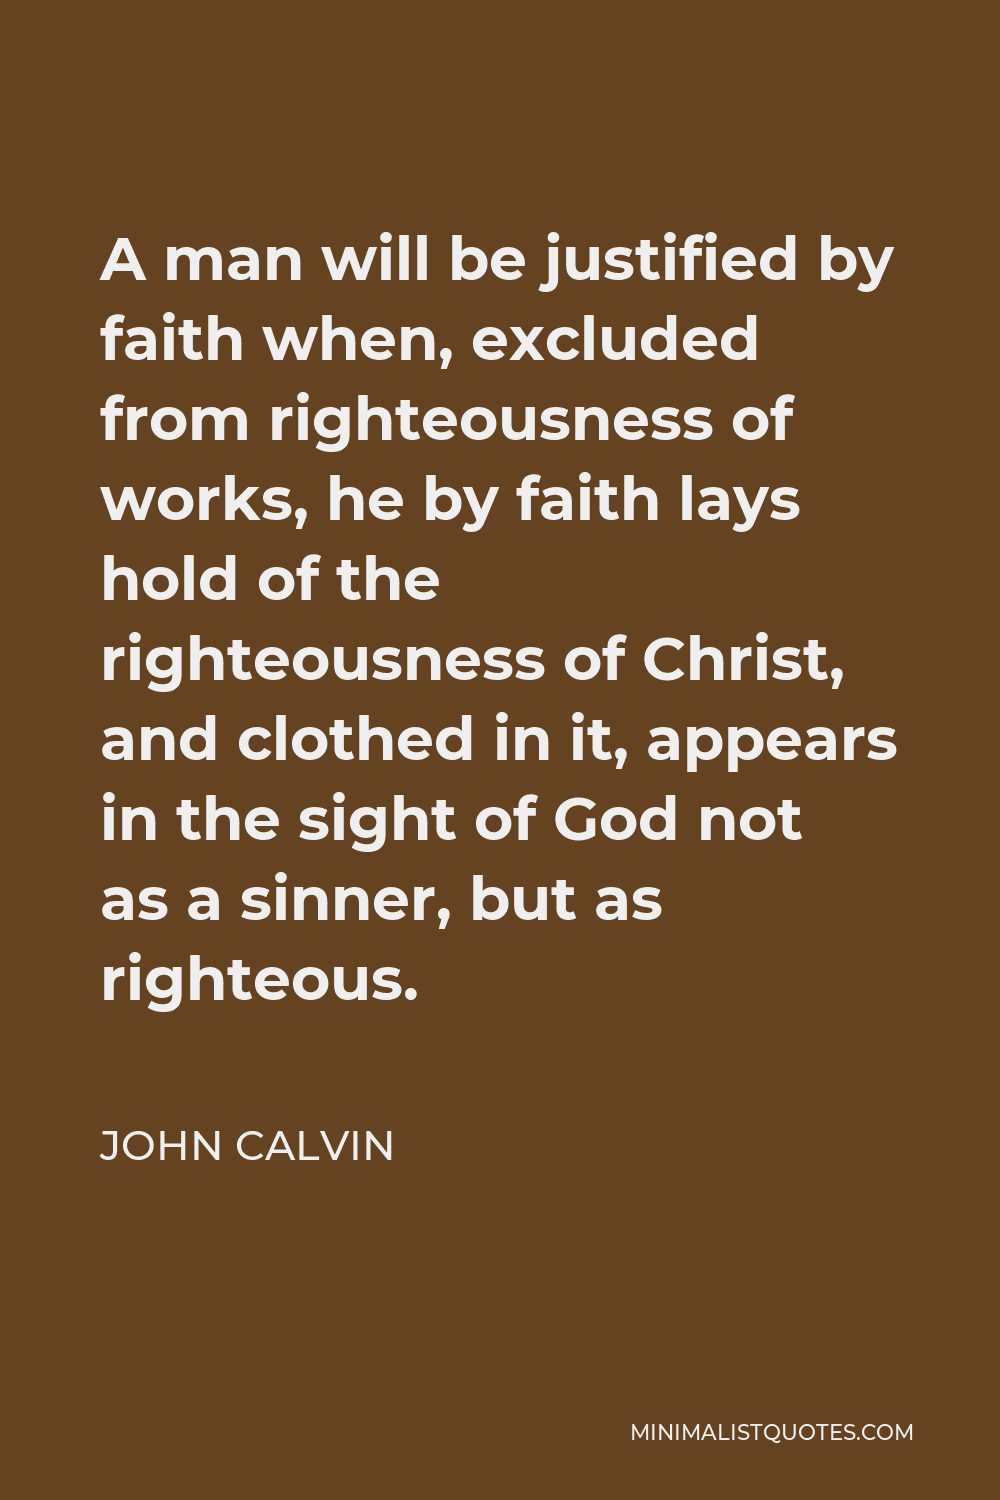 John Calvin Quote - A man will be justified by faith when, excluded from righteousness of works, he by faith lays hold of the righteousness of Christ, and clothed in it, appears in the sight of God not as a sinner, but as righteous.